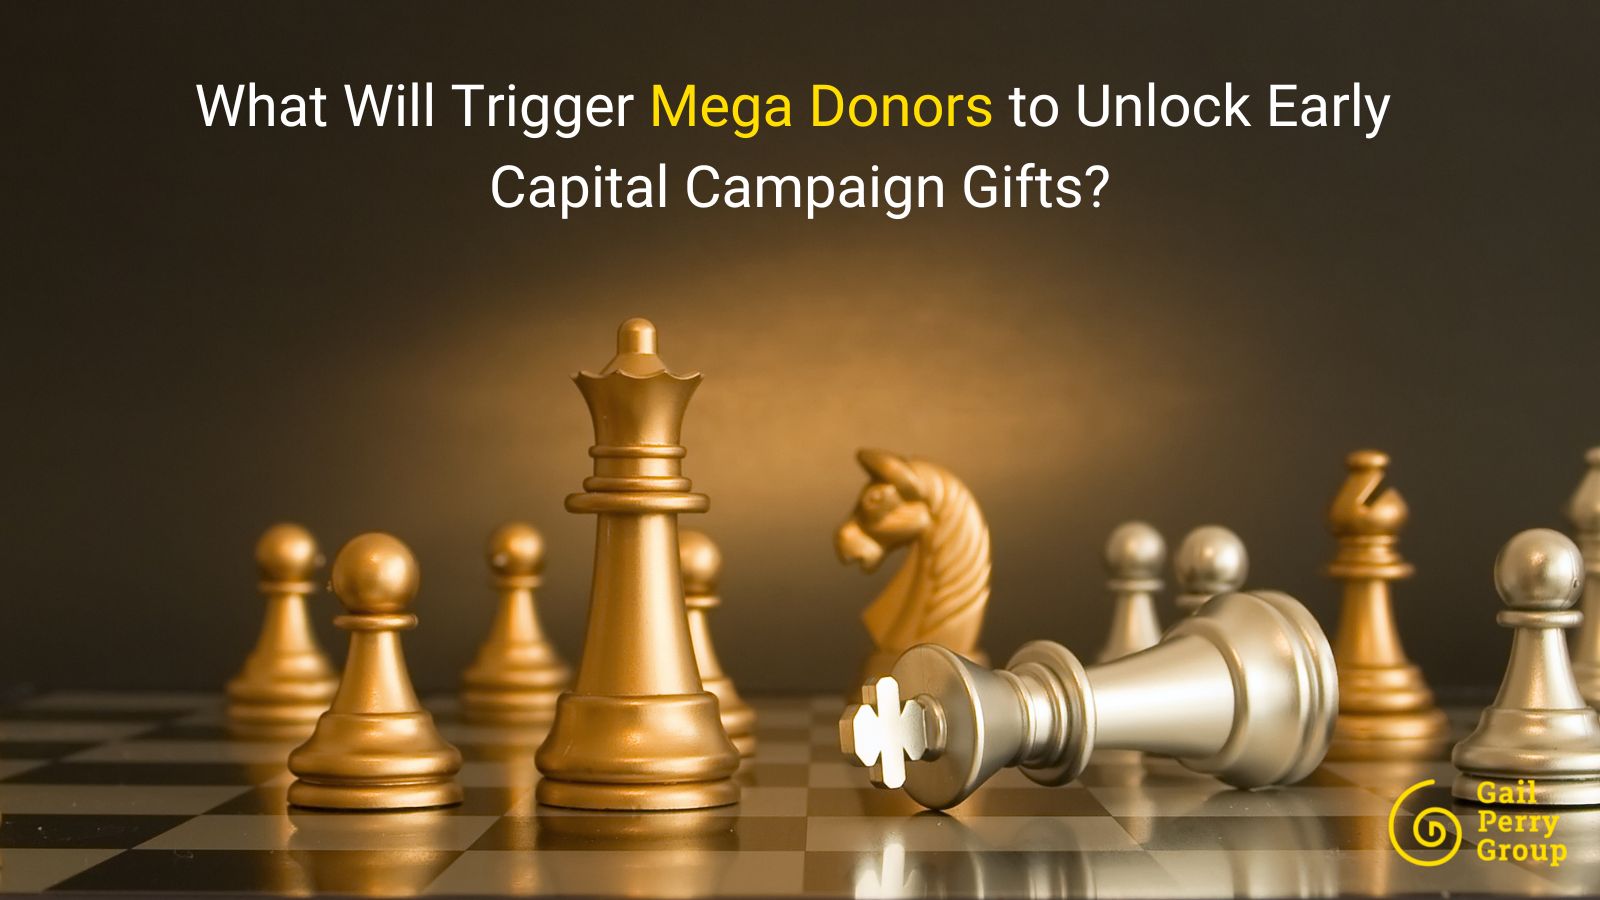 What Will Trigger Mega Donors to Unlock Early Capital Campaign Gifts?